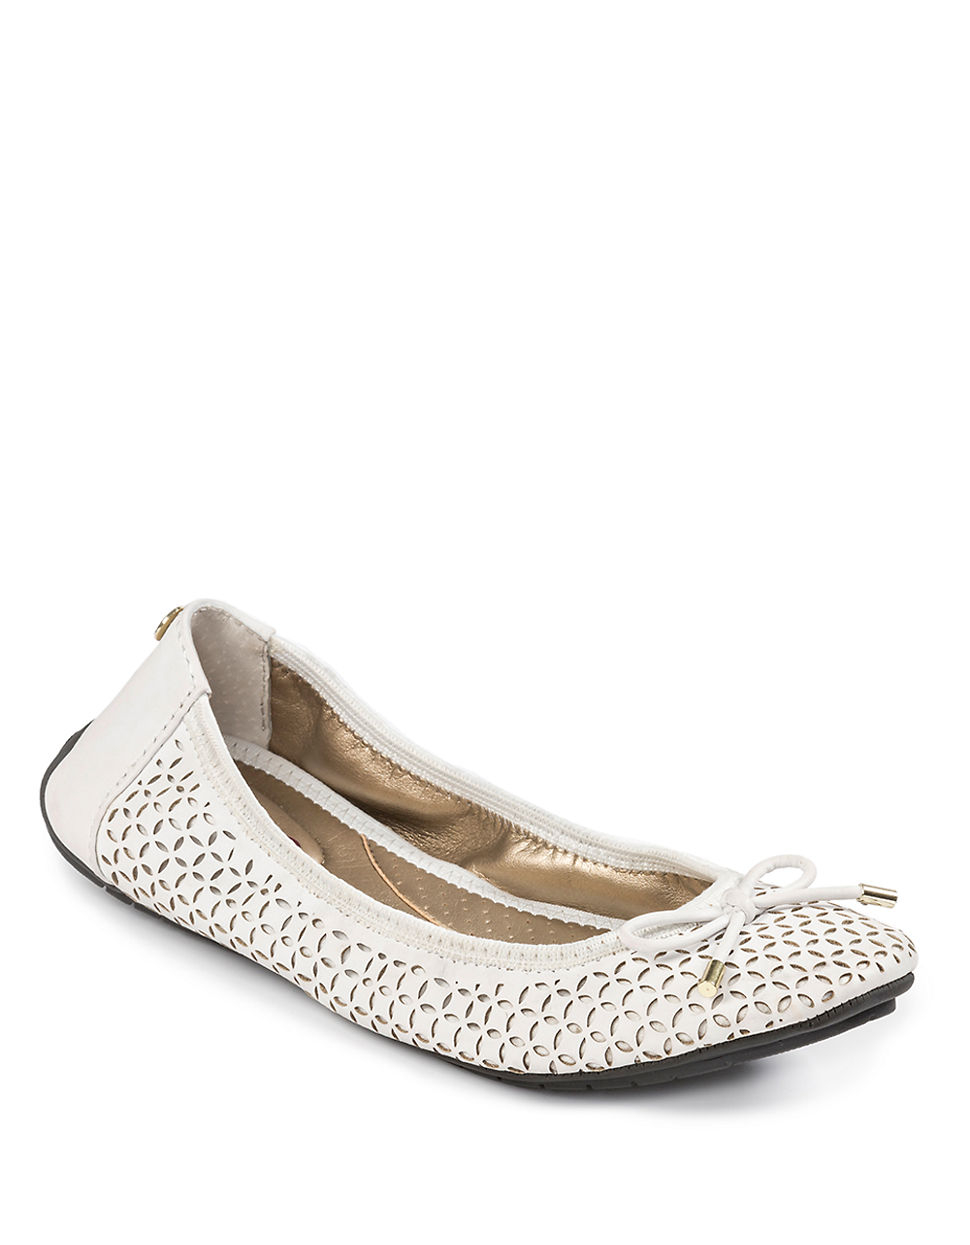 Lyst - Me too Lindsey Leather Flats in White